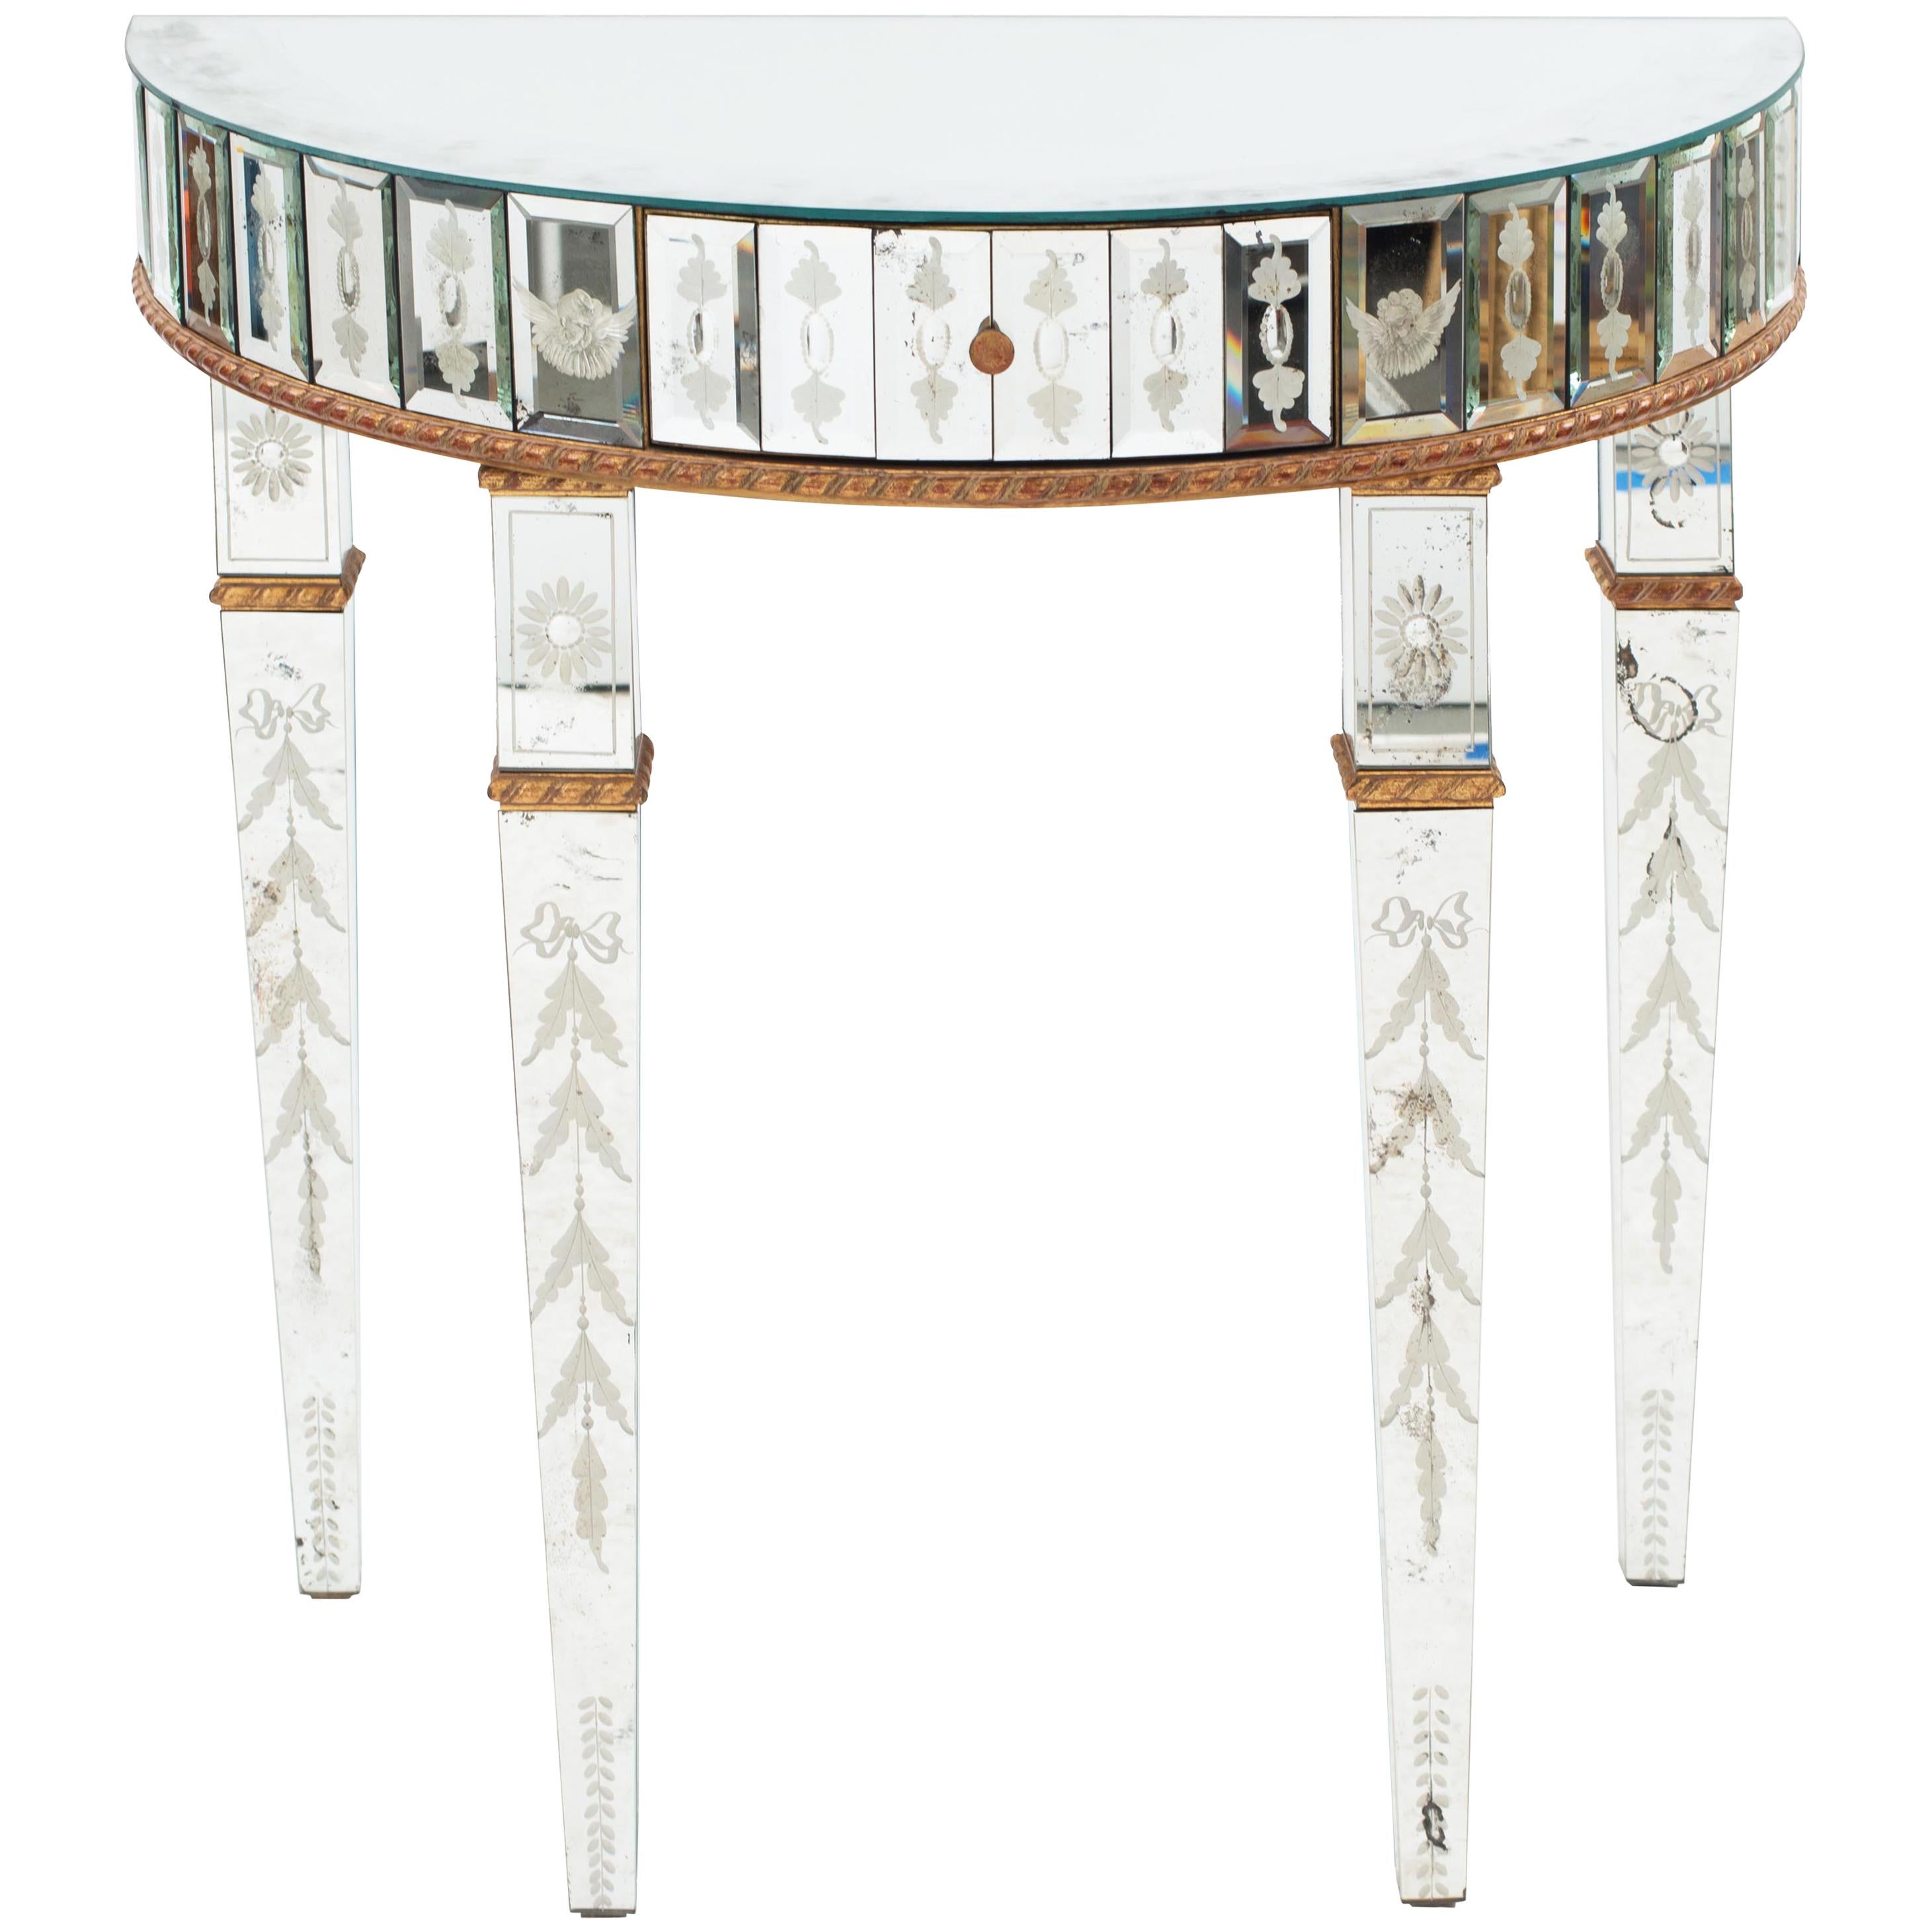 Pair of Italian Neoclassic Style Mirrored Demilune Console Tables